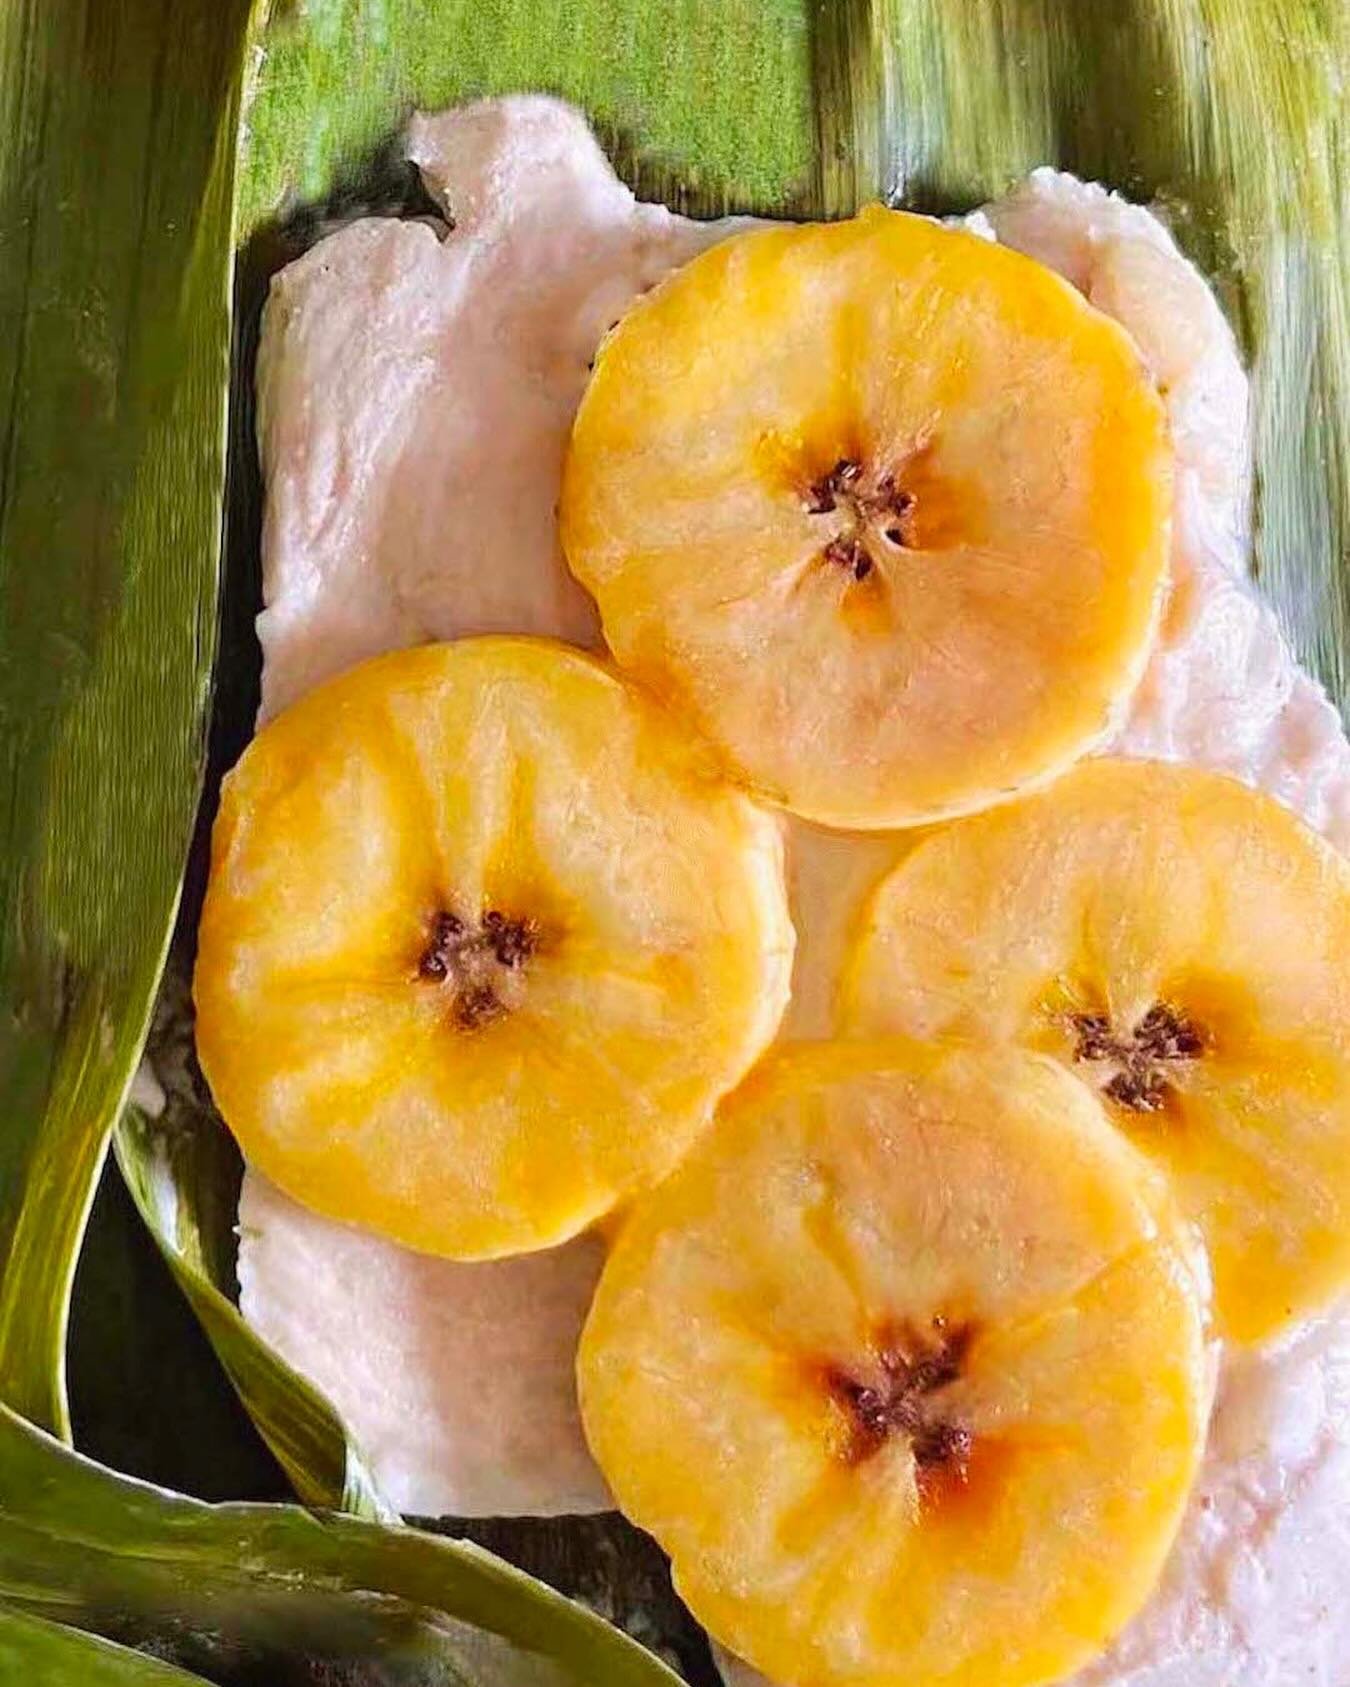 This week in #taste_budding: thin-sliced chicken breast marinated in coconut milk, grated coconut, lime, and jalepe&ntilde;o, oven-steamed with plantains in banana leaf packets. Recipe by @ChefPierreThiam from his book &ldquo;Yolele: Recipes from the